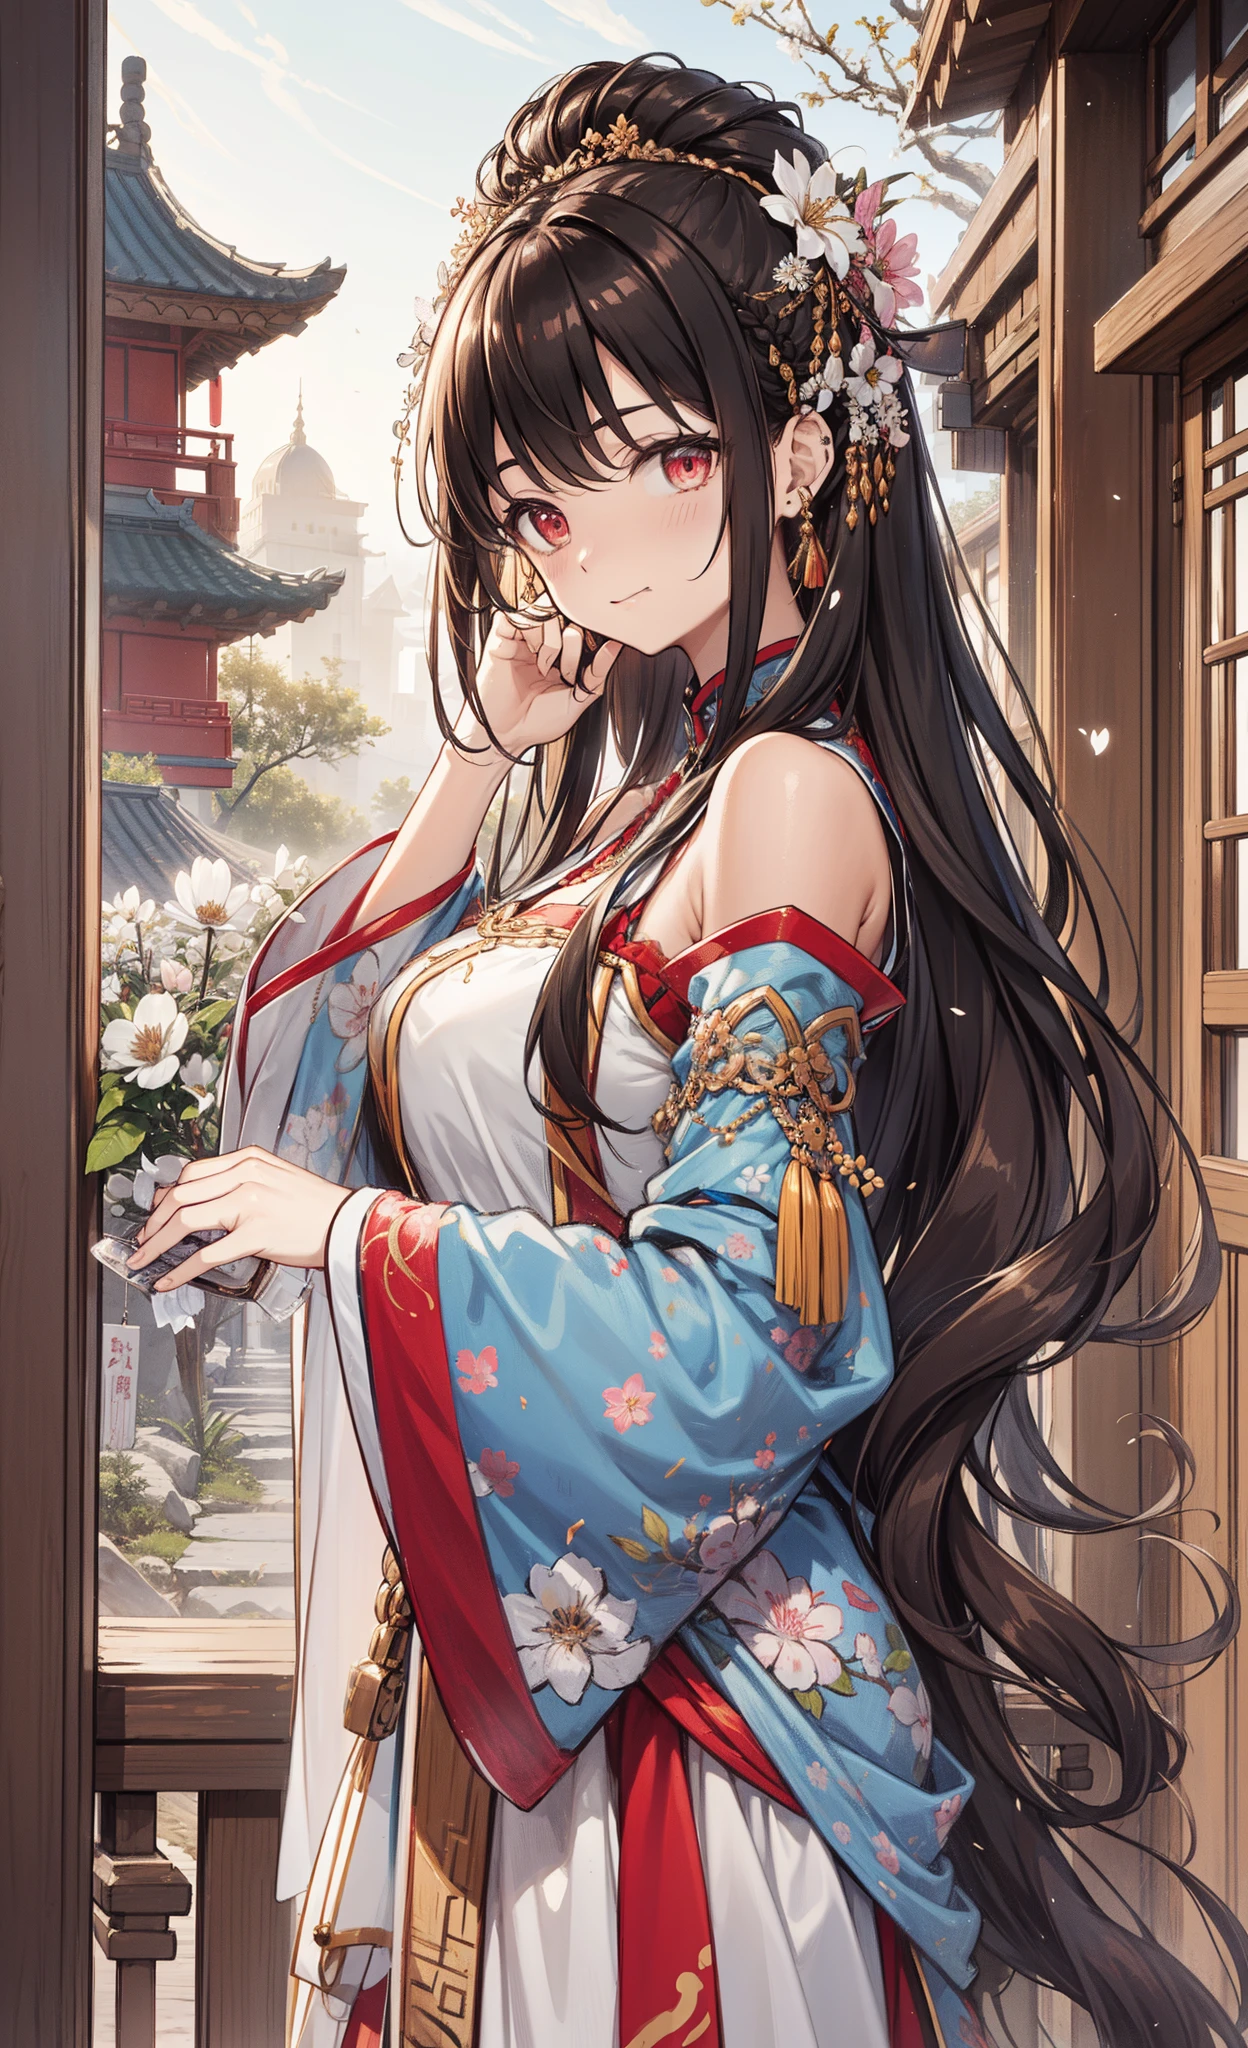 top-quality、Top image quality、tmasterpiece、(tmasterpiece:1.2),Atdan, 1 plump girl, Alone, Branch, flowers blooming, jewely, a skirt, ear nipple ring, that tree, through bangs, Long gray hair, Ancient Chinese courtyard，hair adornments, view the viewer, Chinese clothes, sheer transparent clothes，black hair color hair, hairflower, Brown hair, exposed bare shoulders, Very long hair, Wide sleeves, longer sleeves，Beautiful light red eyes